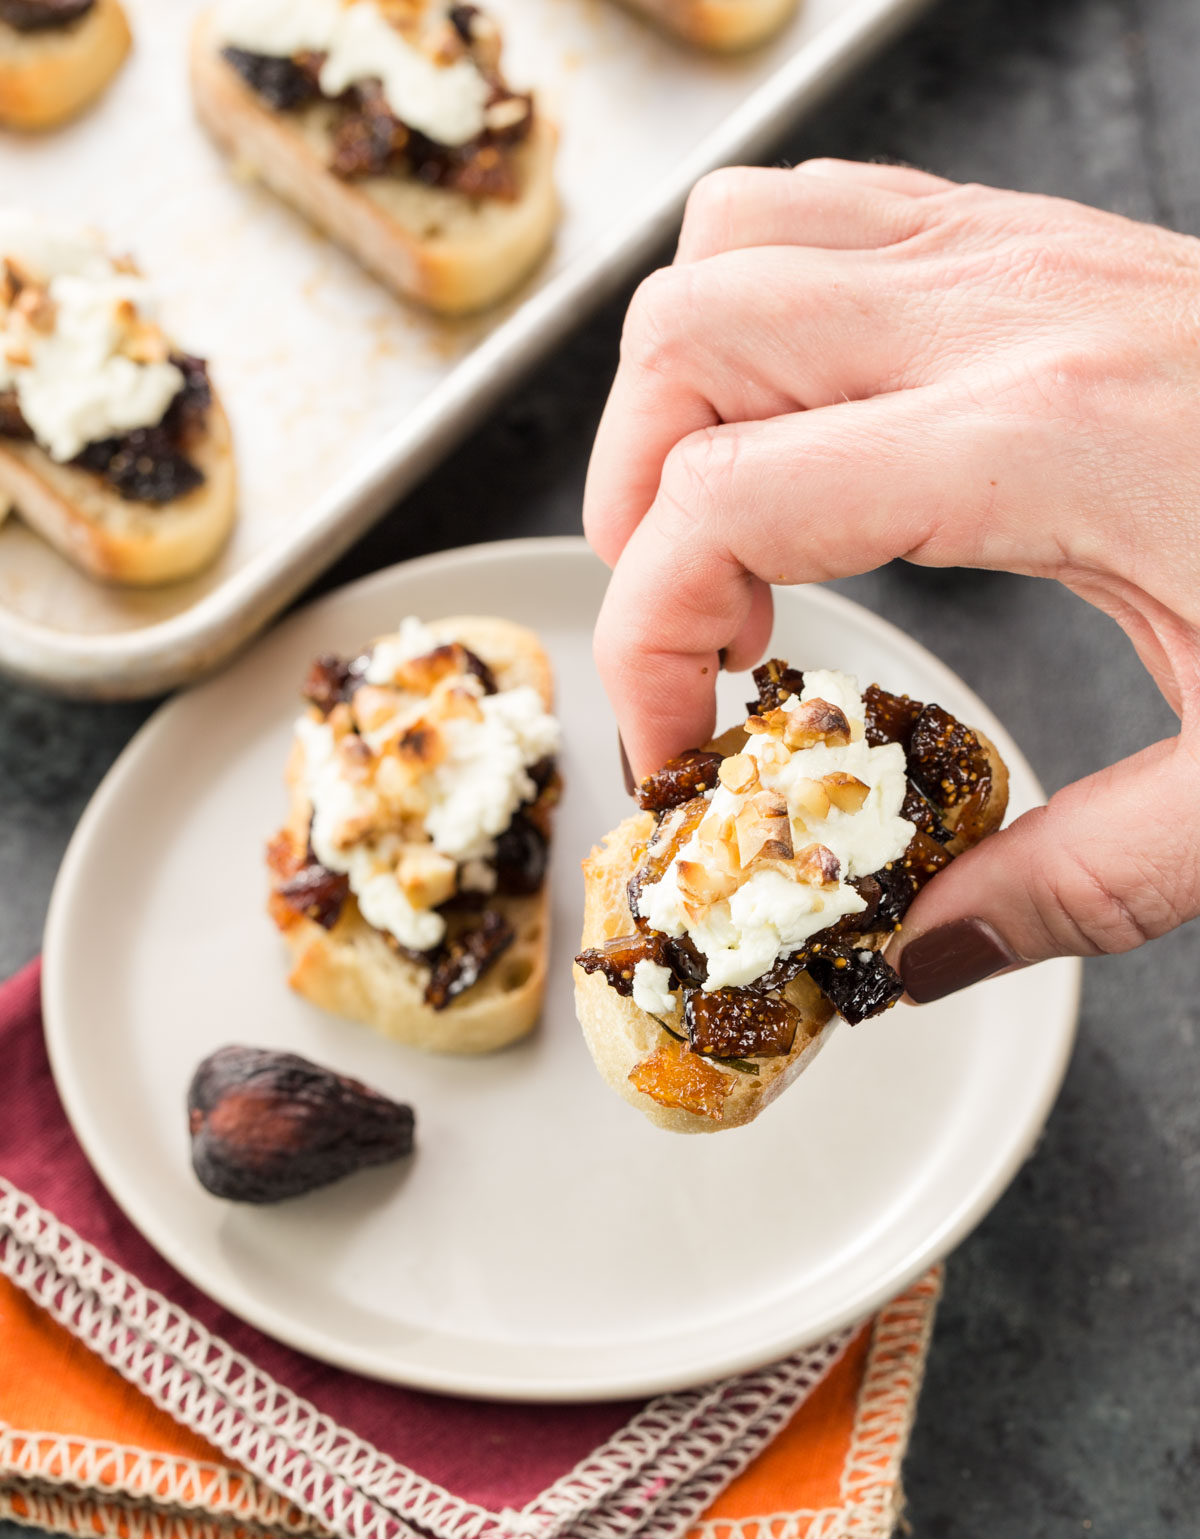 GOAT CHEESE WITH FIG SPREAD AND PROSCIUTTO